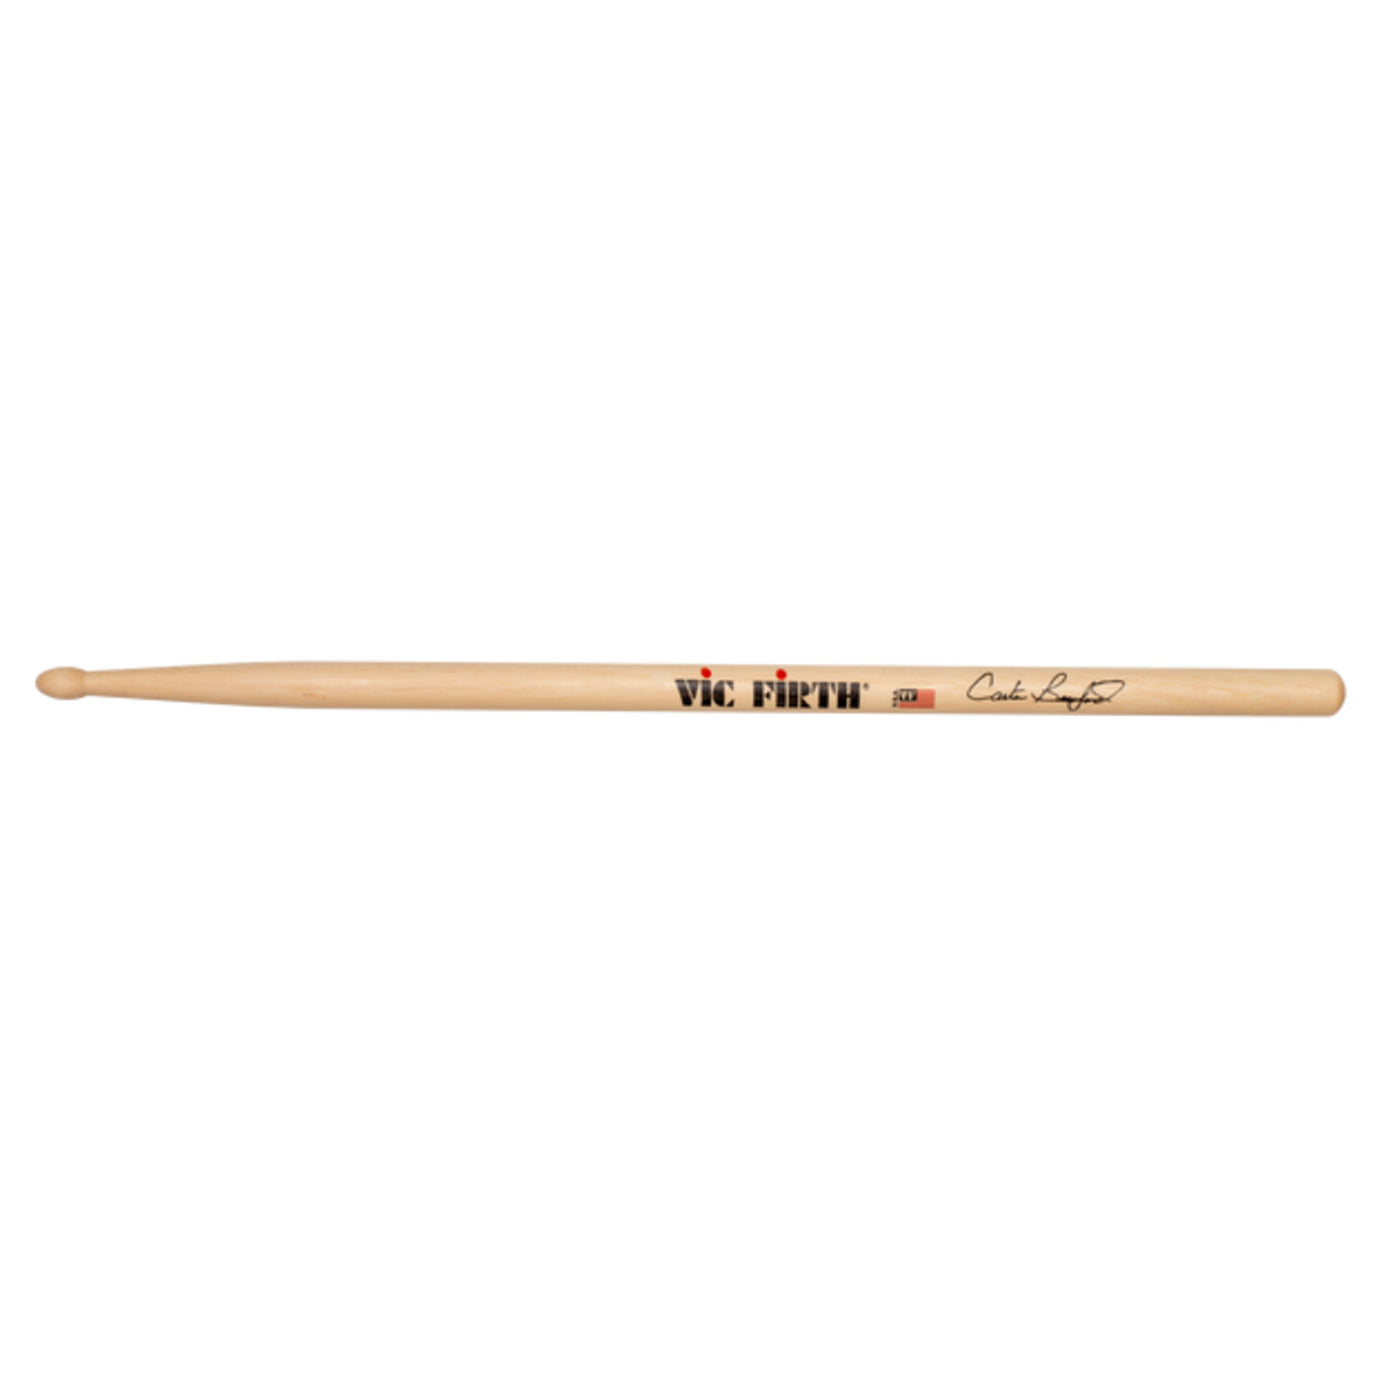 Vic Firth Signature Series - Carter Beauford Drumstick (SBEA2)